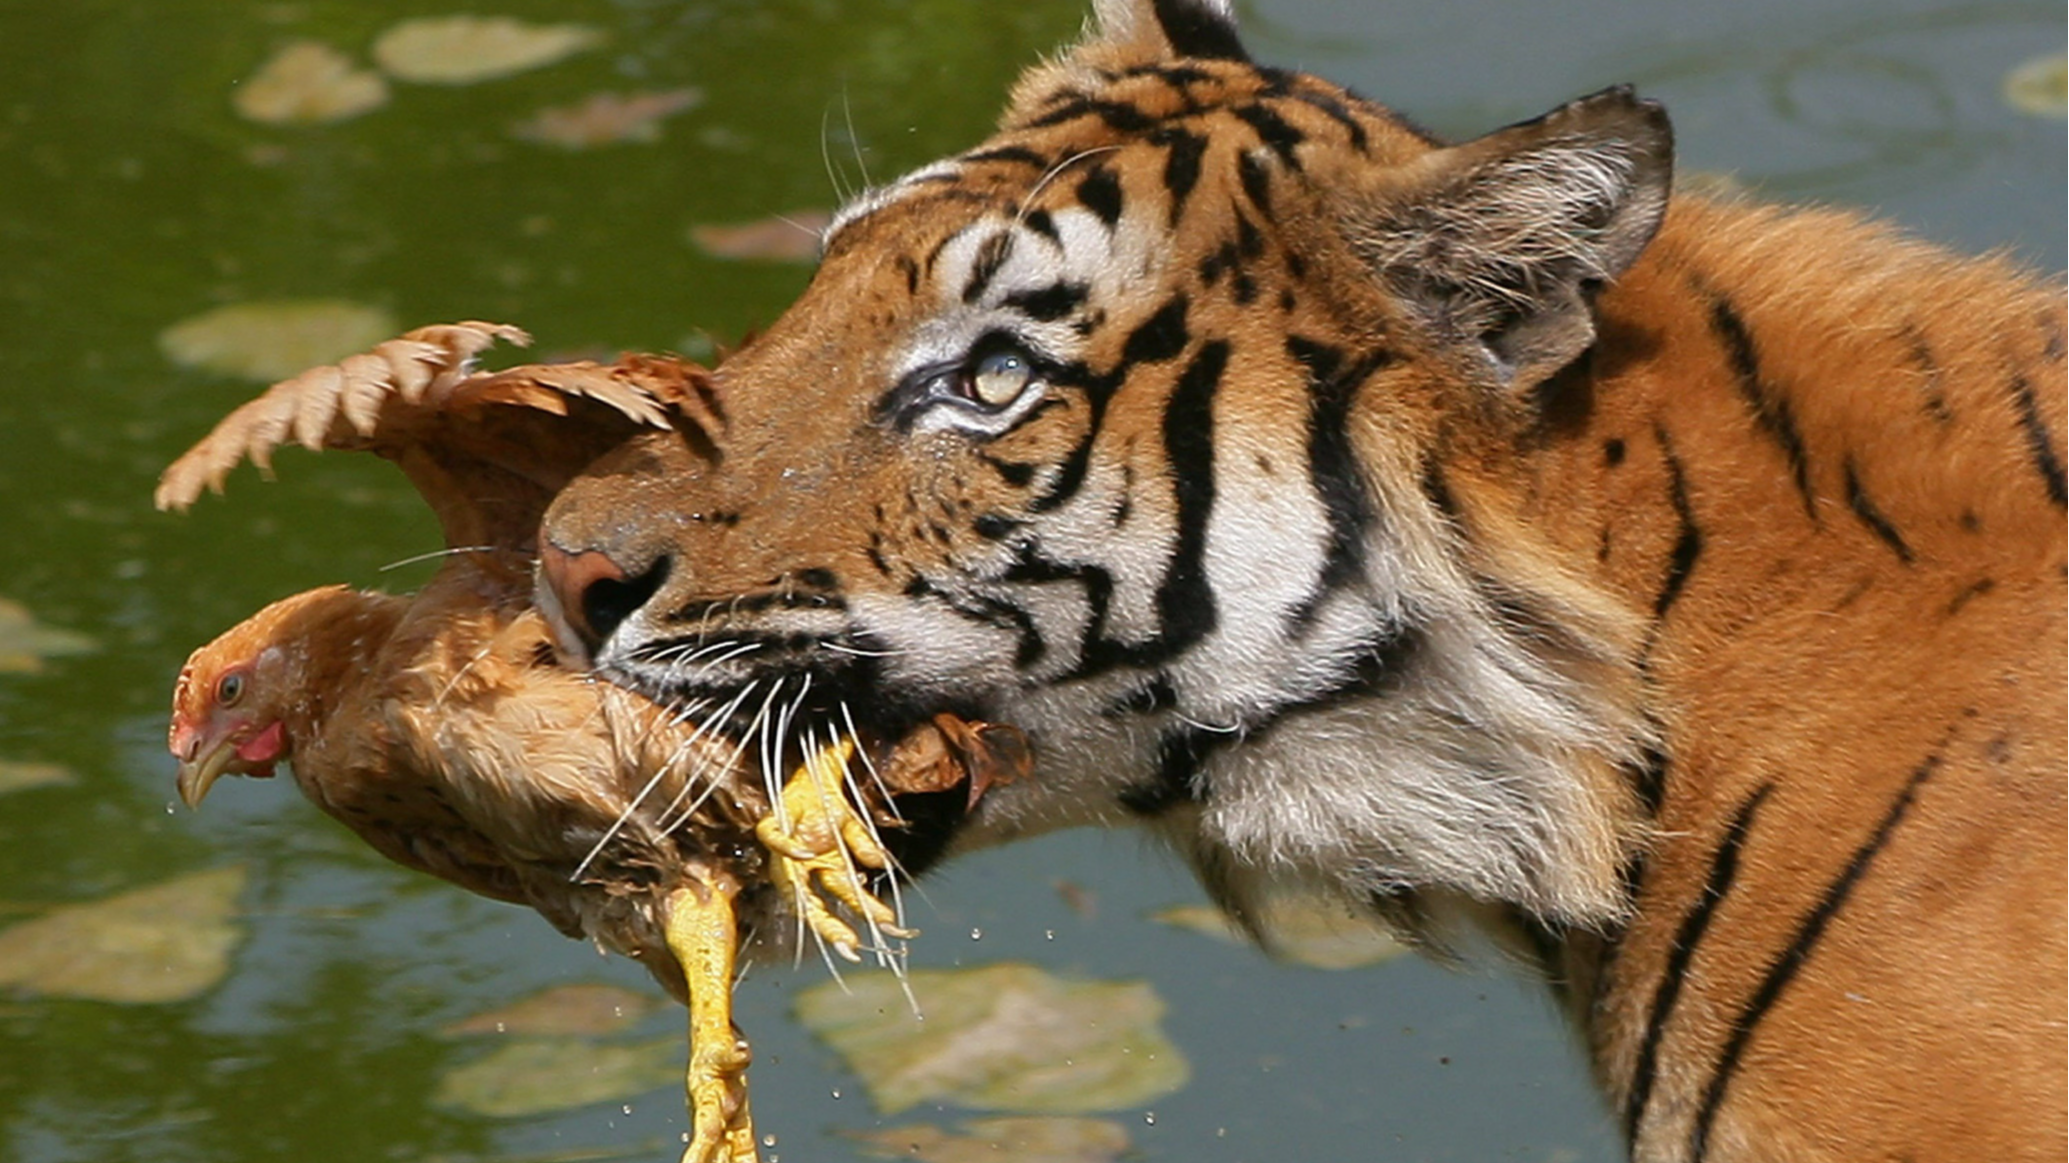 Chinese park pleads for live chickens to stop tigers starving in lockdown |  Financial Times